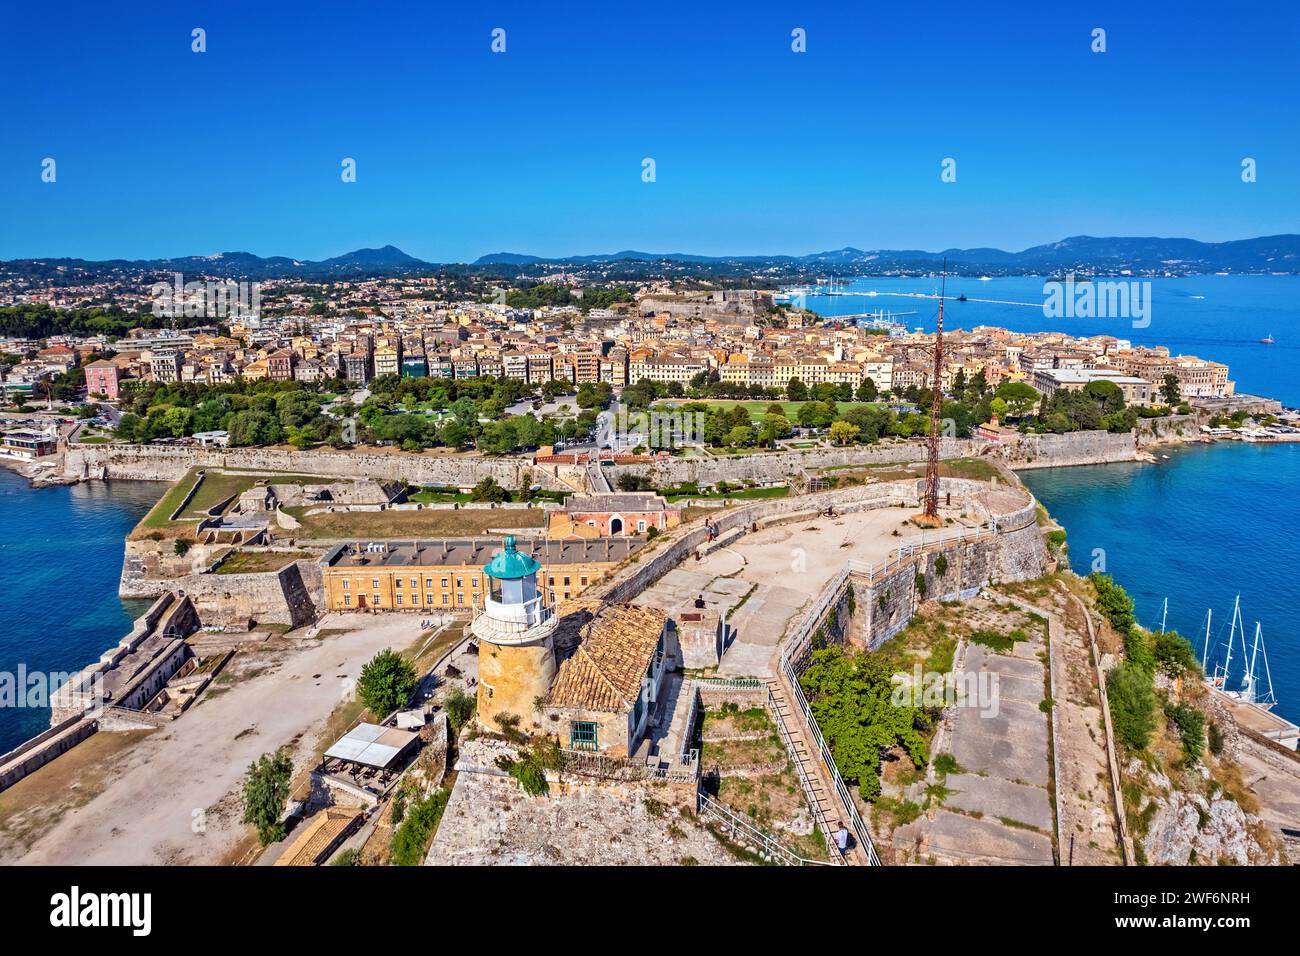 Panoramic view of the Old Town of Corfu with the lighthouse of the Old Fortress in the foreground. Corfu island, Ionian Sea, Greece. Stock Photo